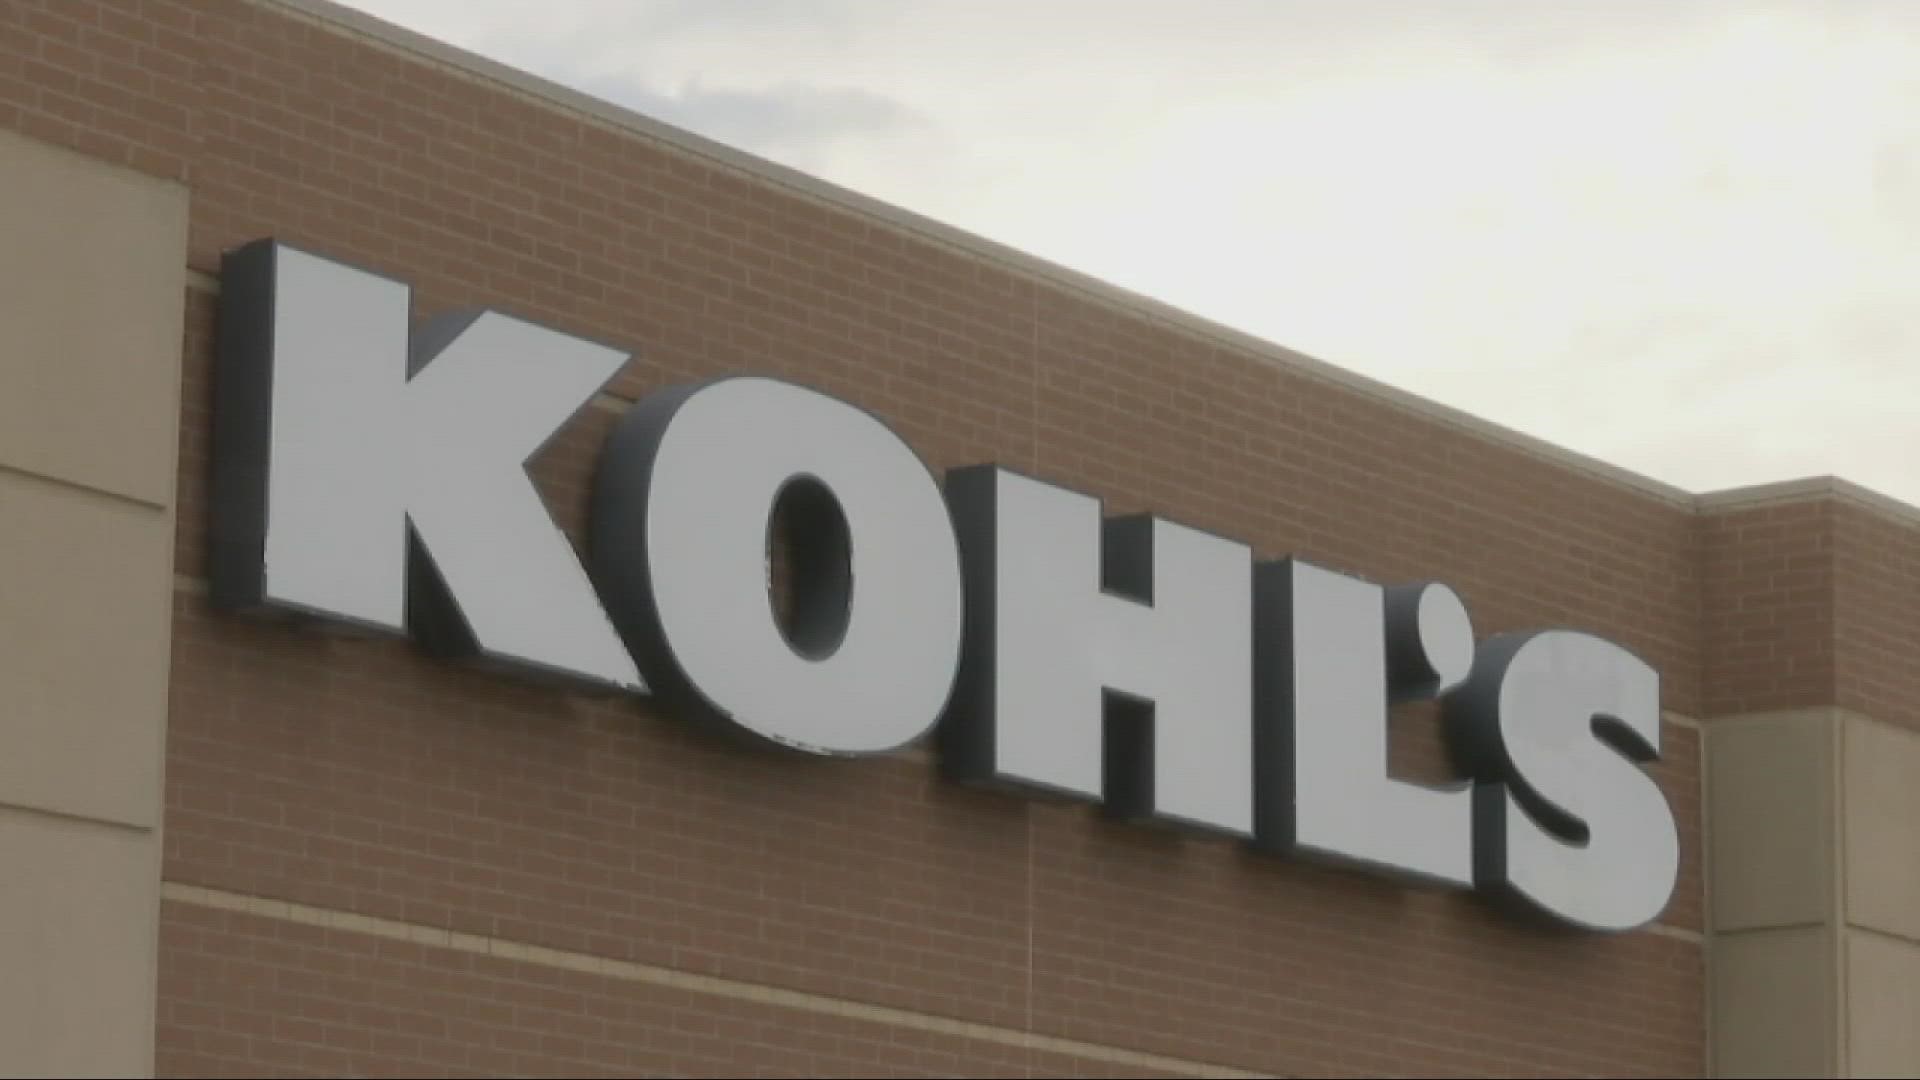 Kohl's has announced their stores will stay closed on Thanksgiving 2022.